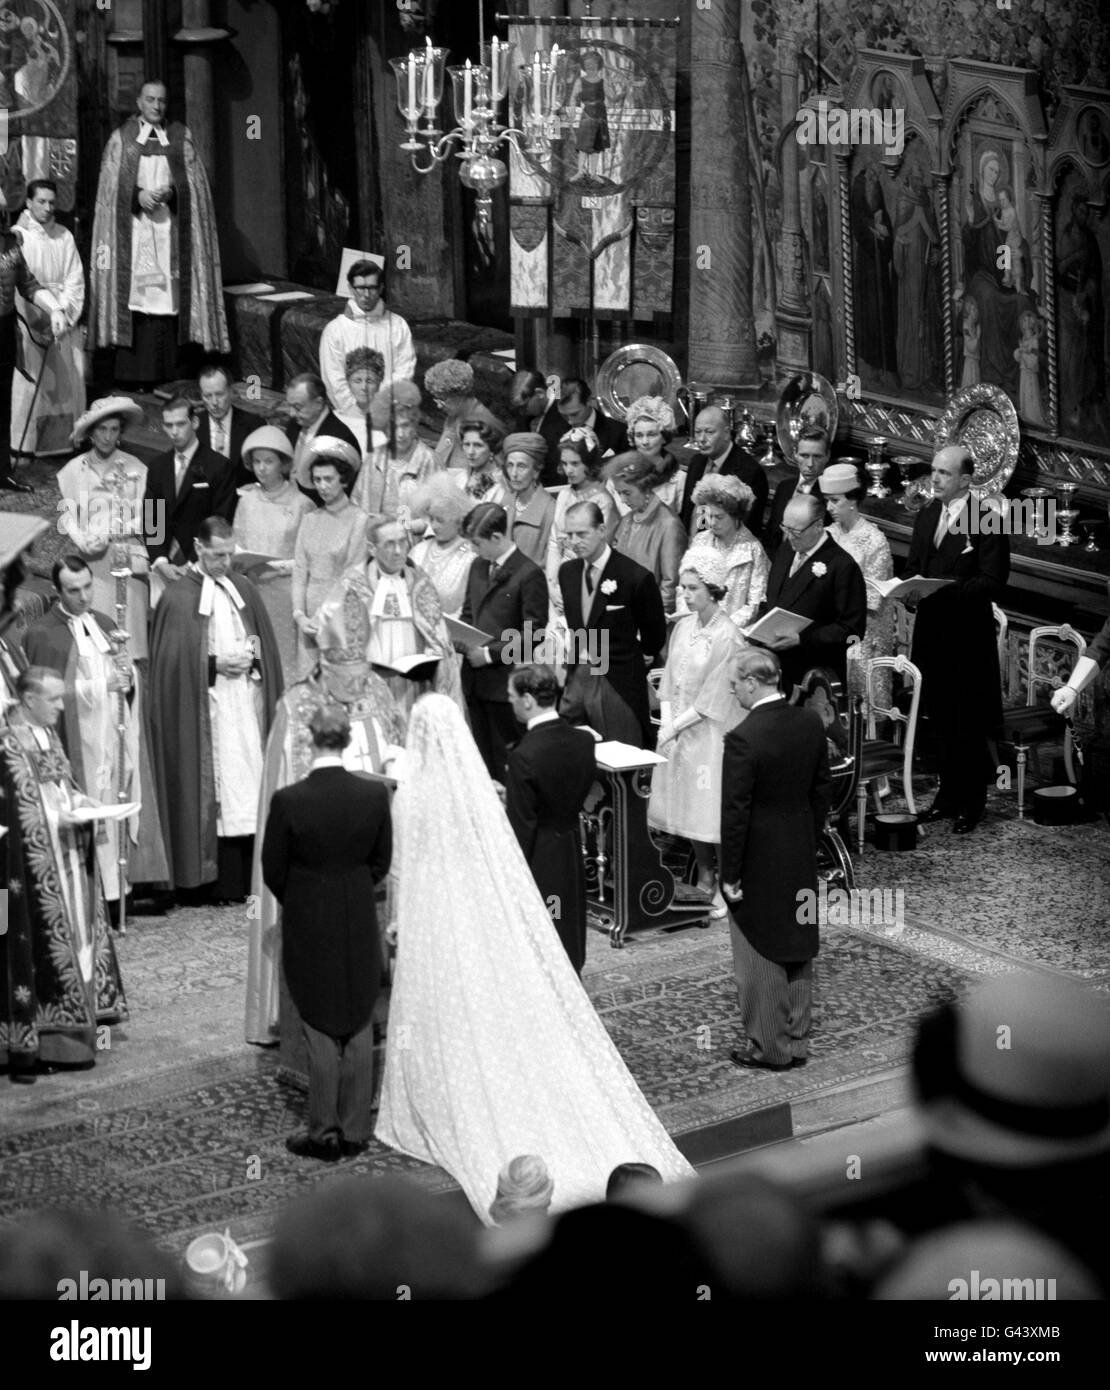 Princess alexandra angus ogilvy during their wedding at westminster abbey  Black and White Stock Photos & Images - Alamy